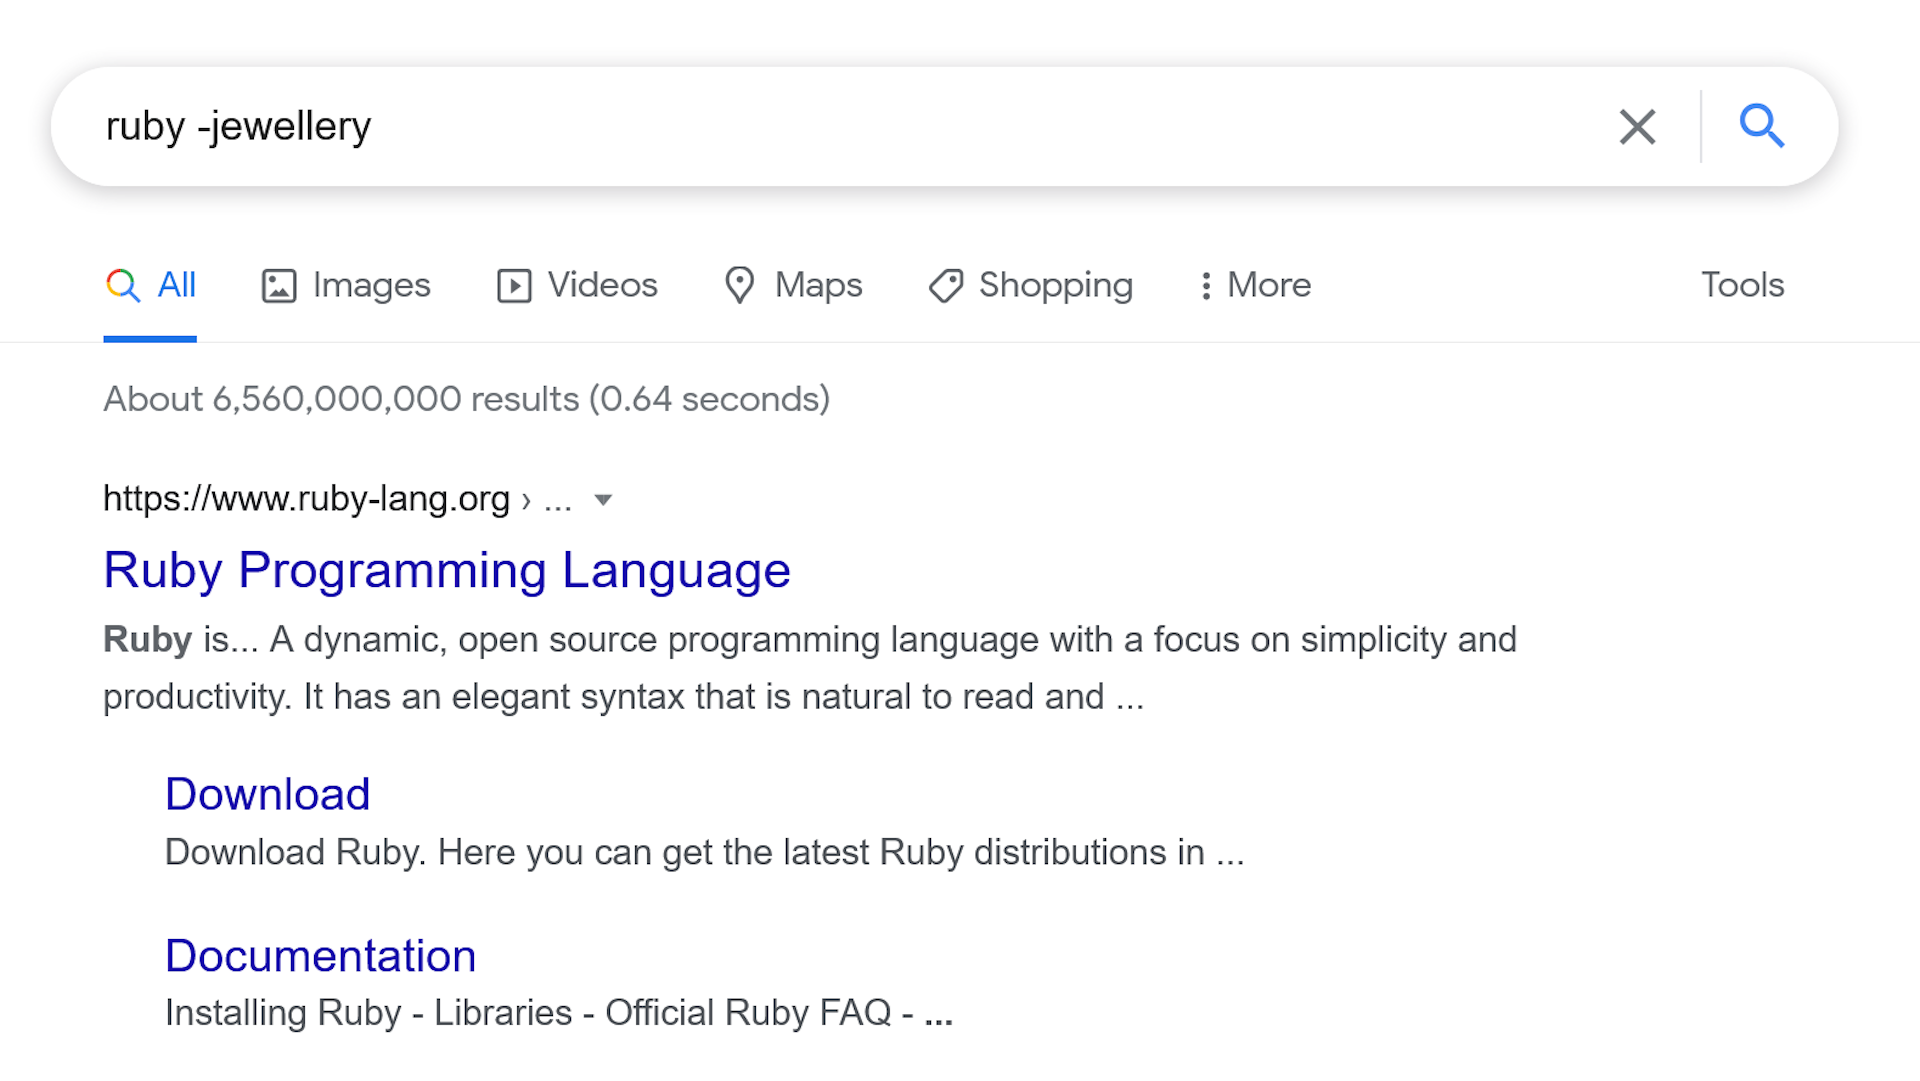 Google search for ruby, excluding jewellery